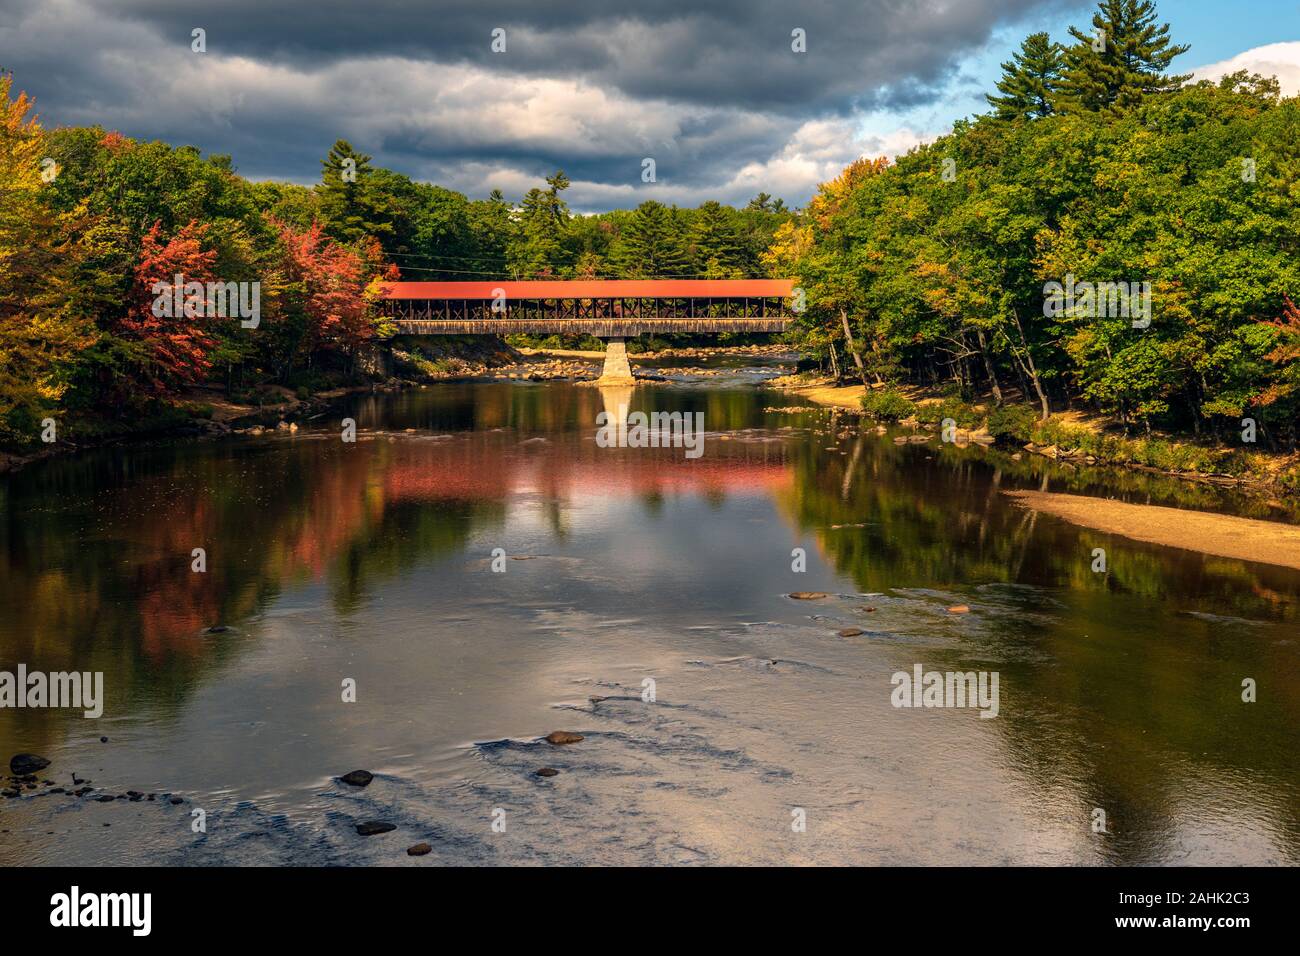 A wooden covered bridge spanning the Saco River near Conway, NH. Stock Photo